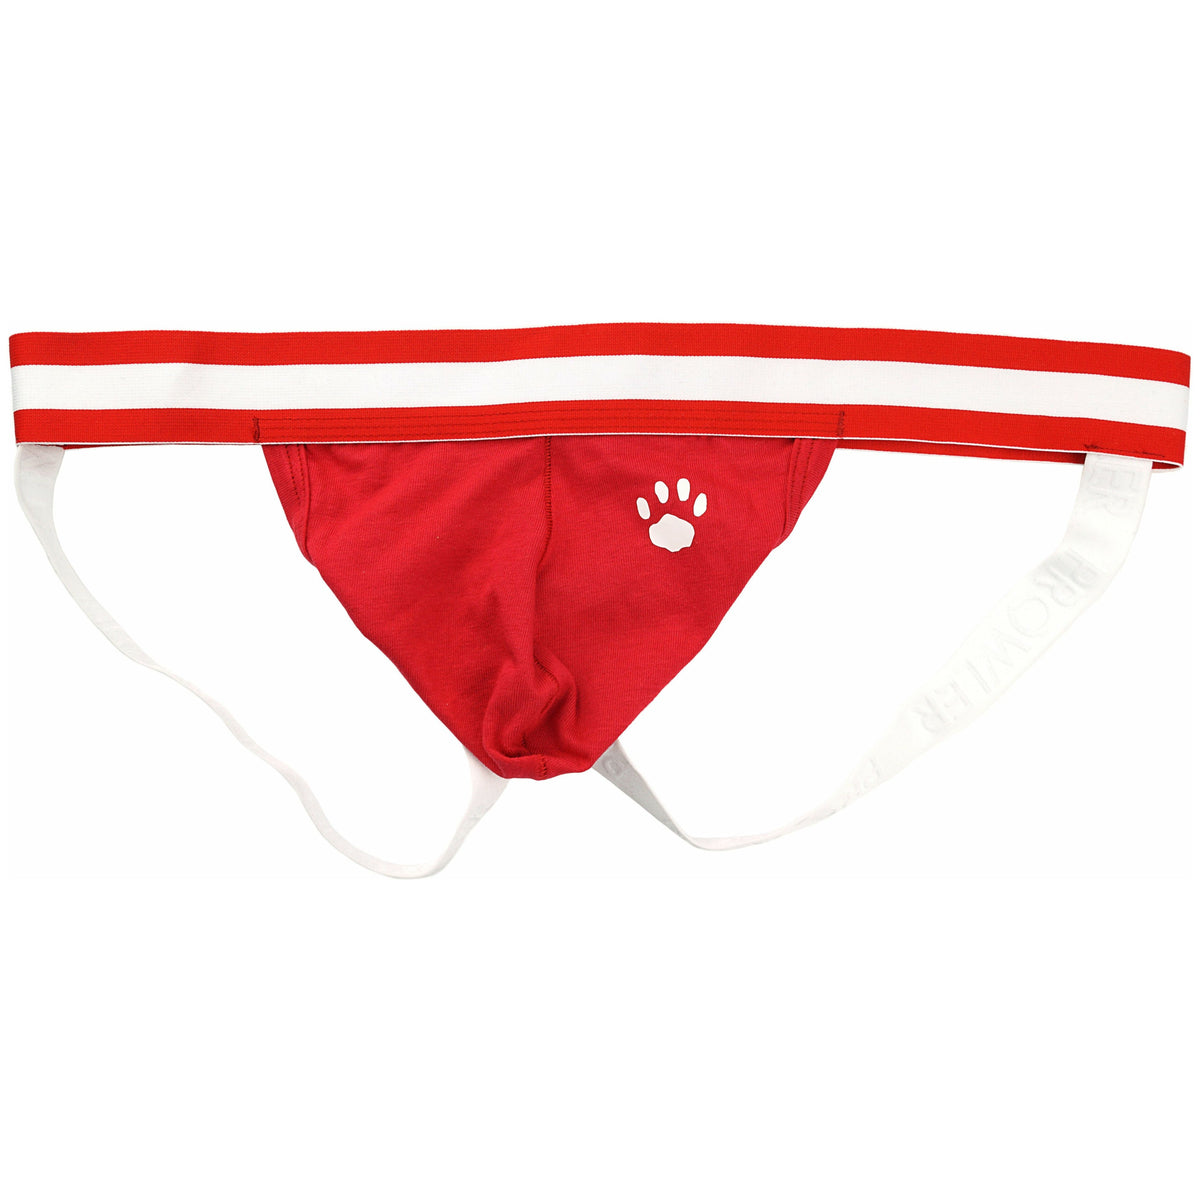 Prowler Classic Jock – Red/White - Large